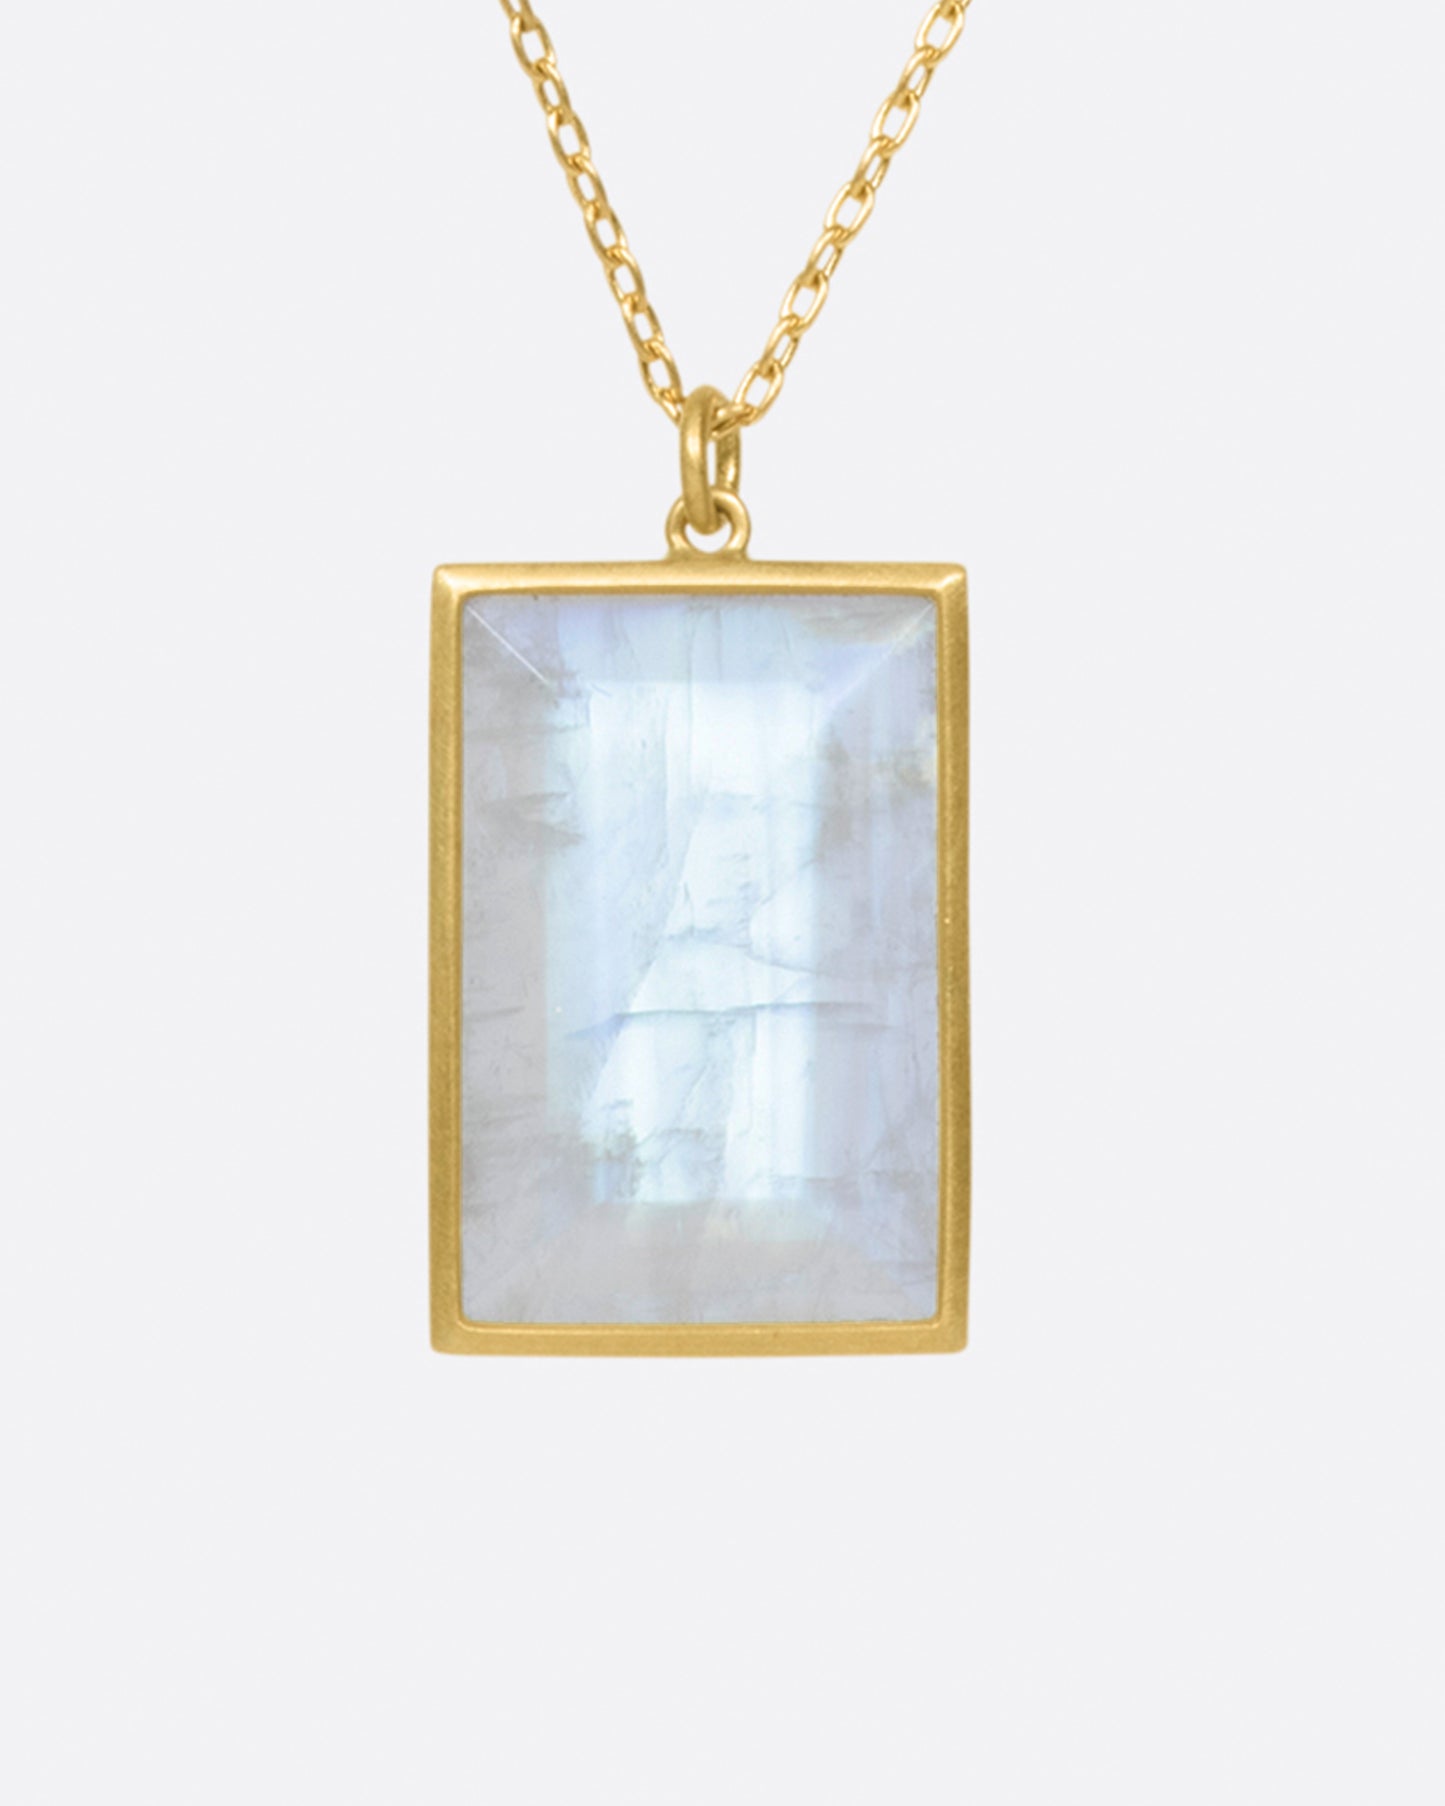 A large rainbow moonstone glows in a narrow matte gold bezel on this pendant necklace.